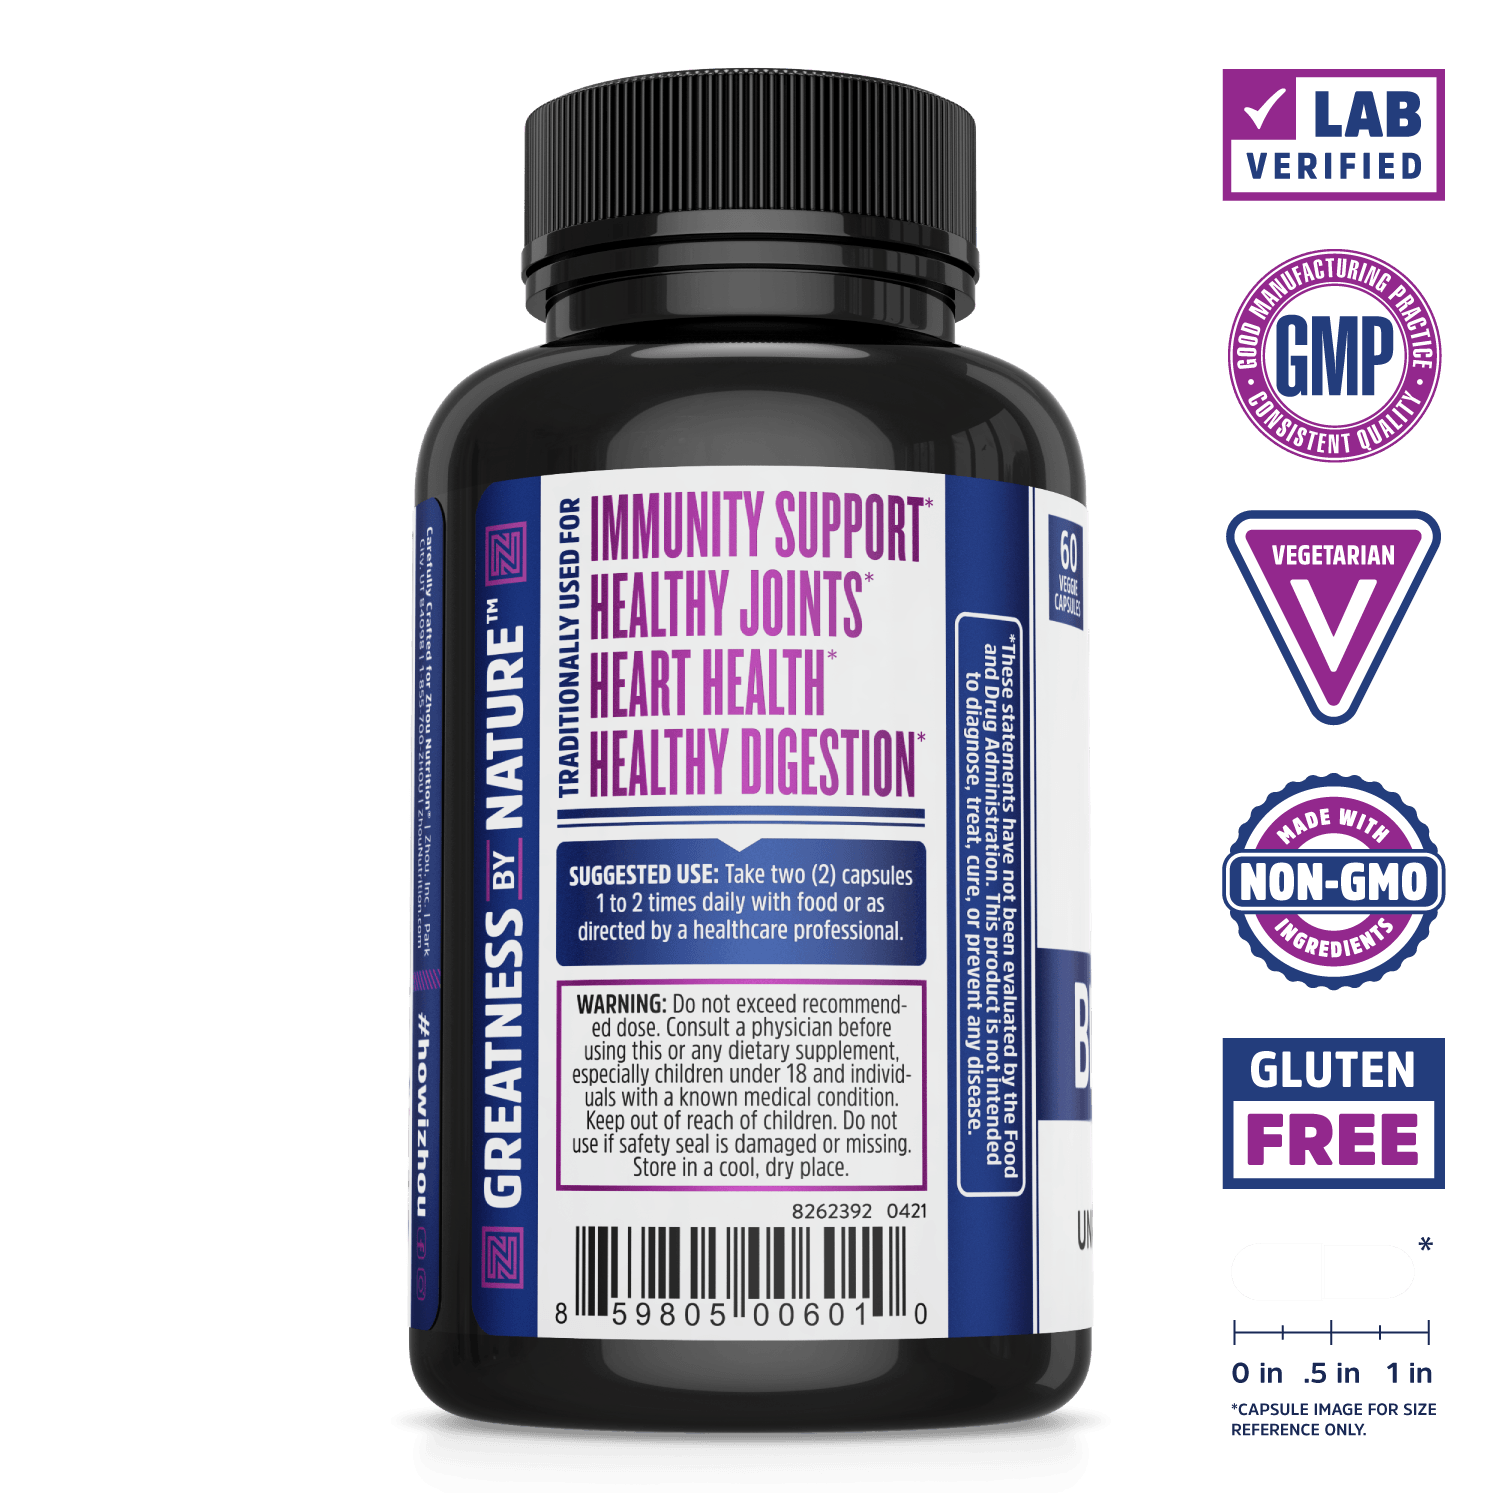 Black Seed Kalonji Oil Liquid Capsules From Zhou Nutrition. Bottle side. Lab verified, good manufacturing practices, vegetarian, made with non-GMO ingredients, gluten free.